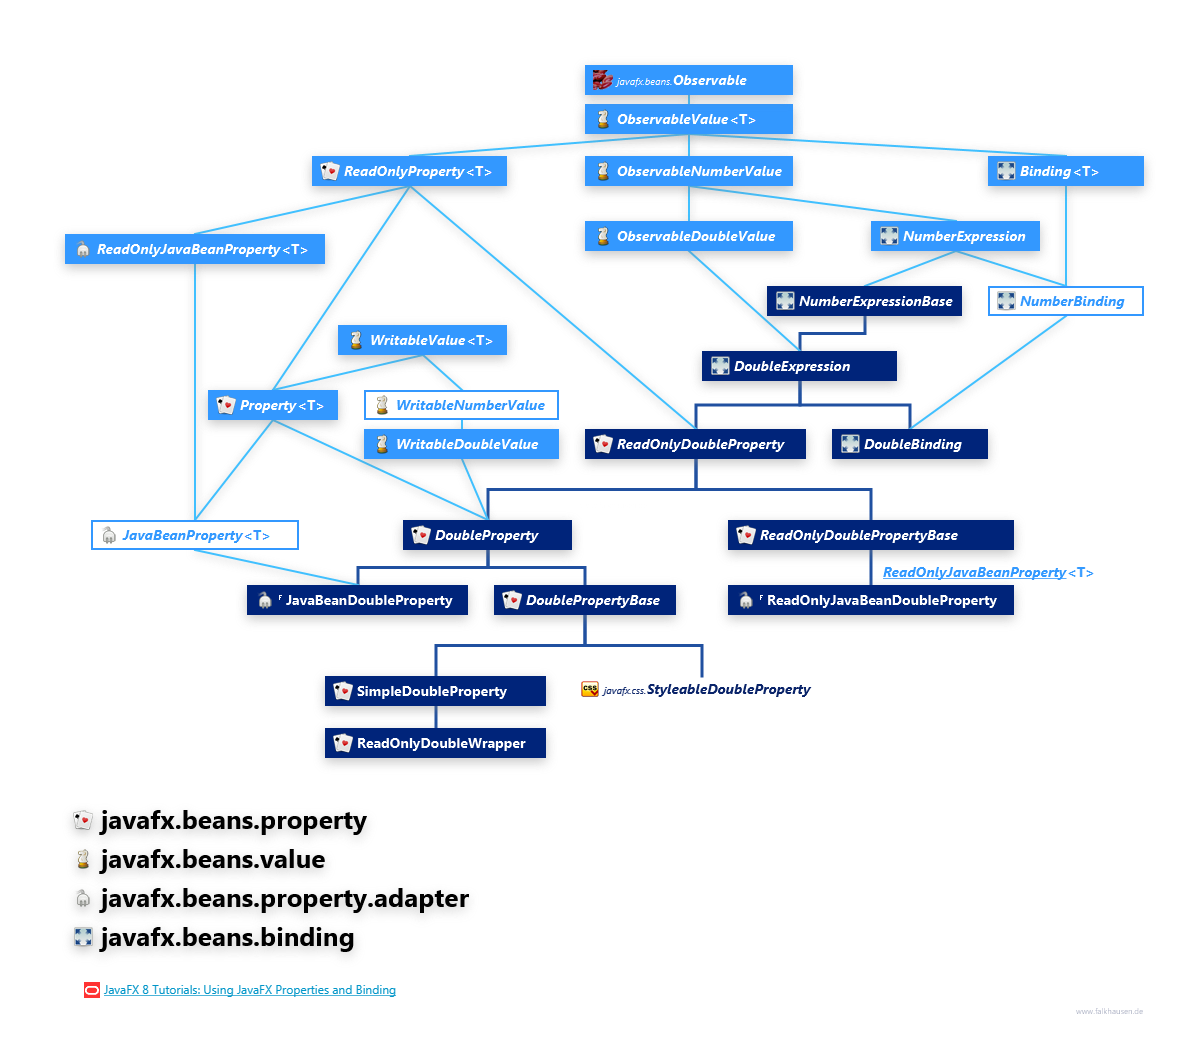 javafx.beans.property javafx.beans.value javafx.beans.property.adapter javafx.beans.binding DoubleProperty Hierarchy class diagram and api documentation for JavaFX 10